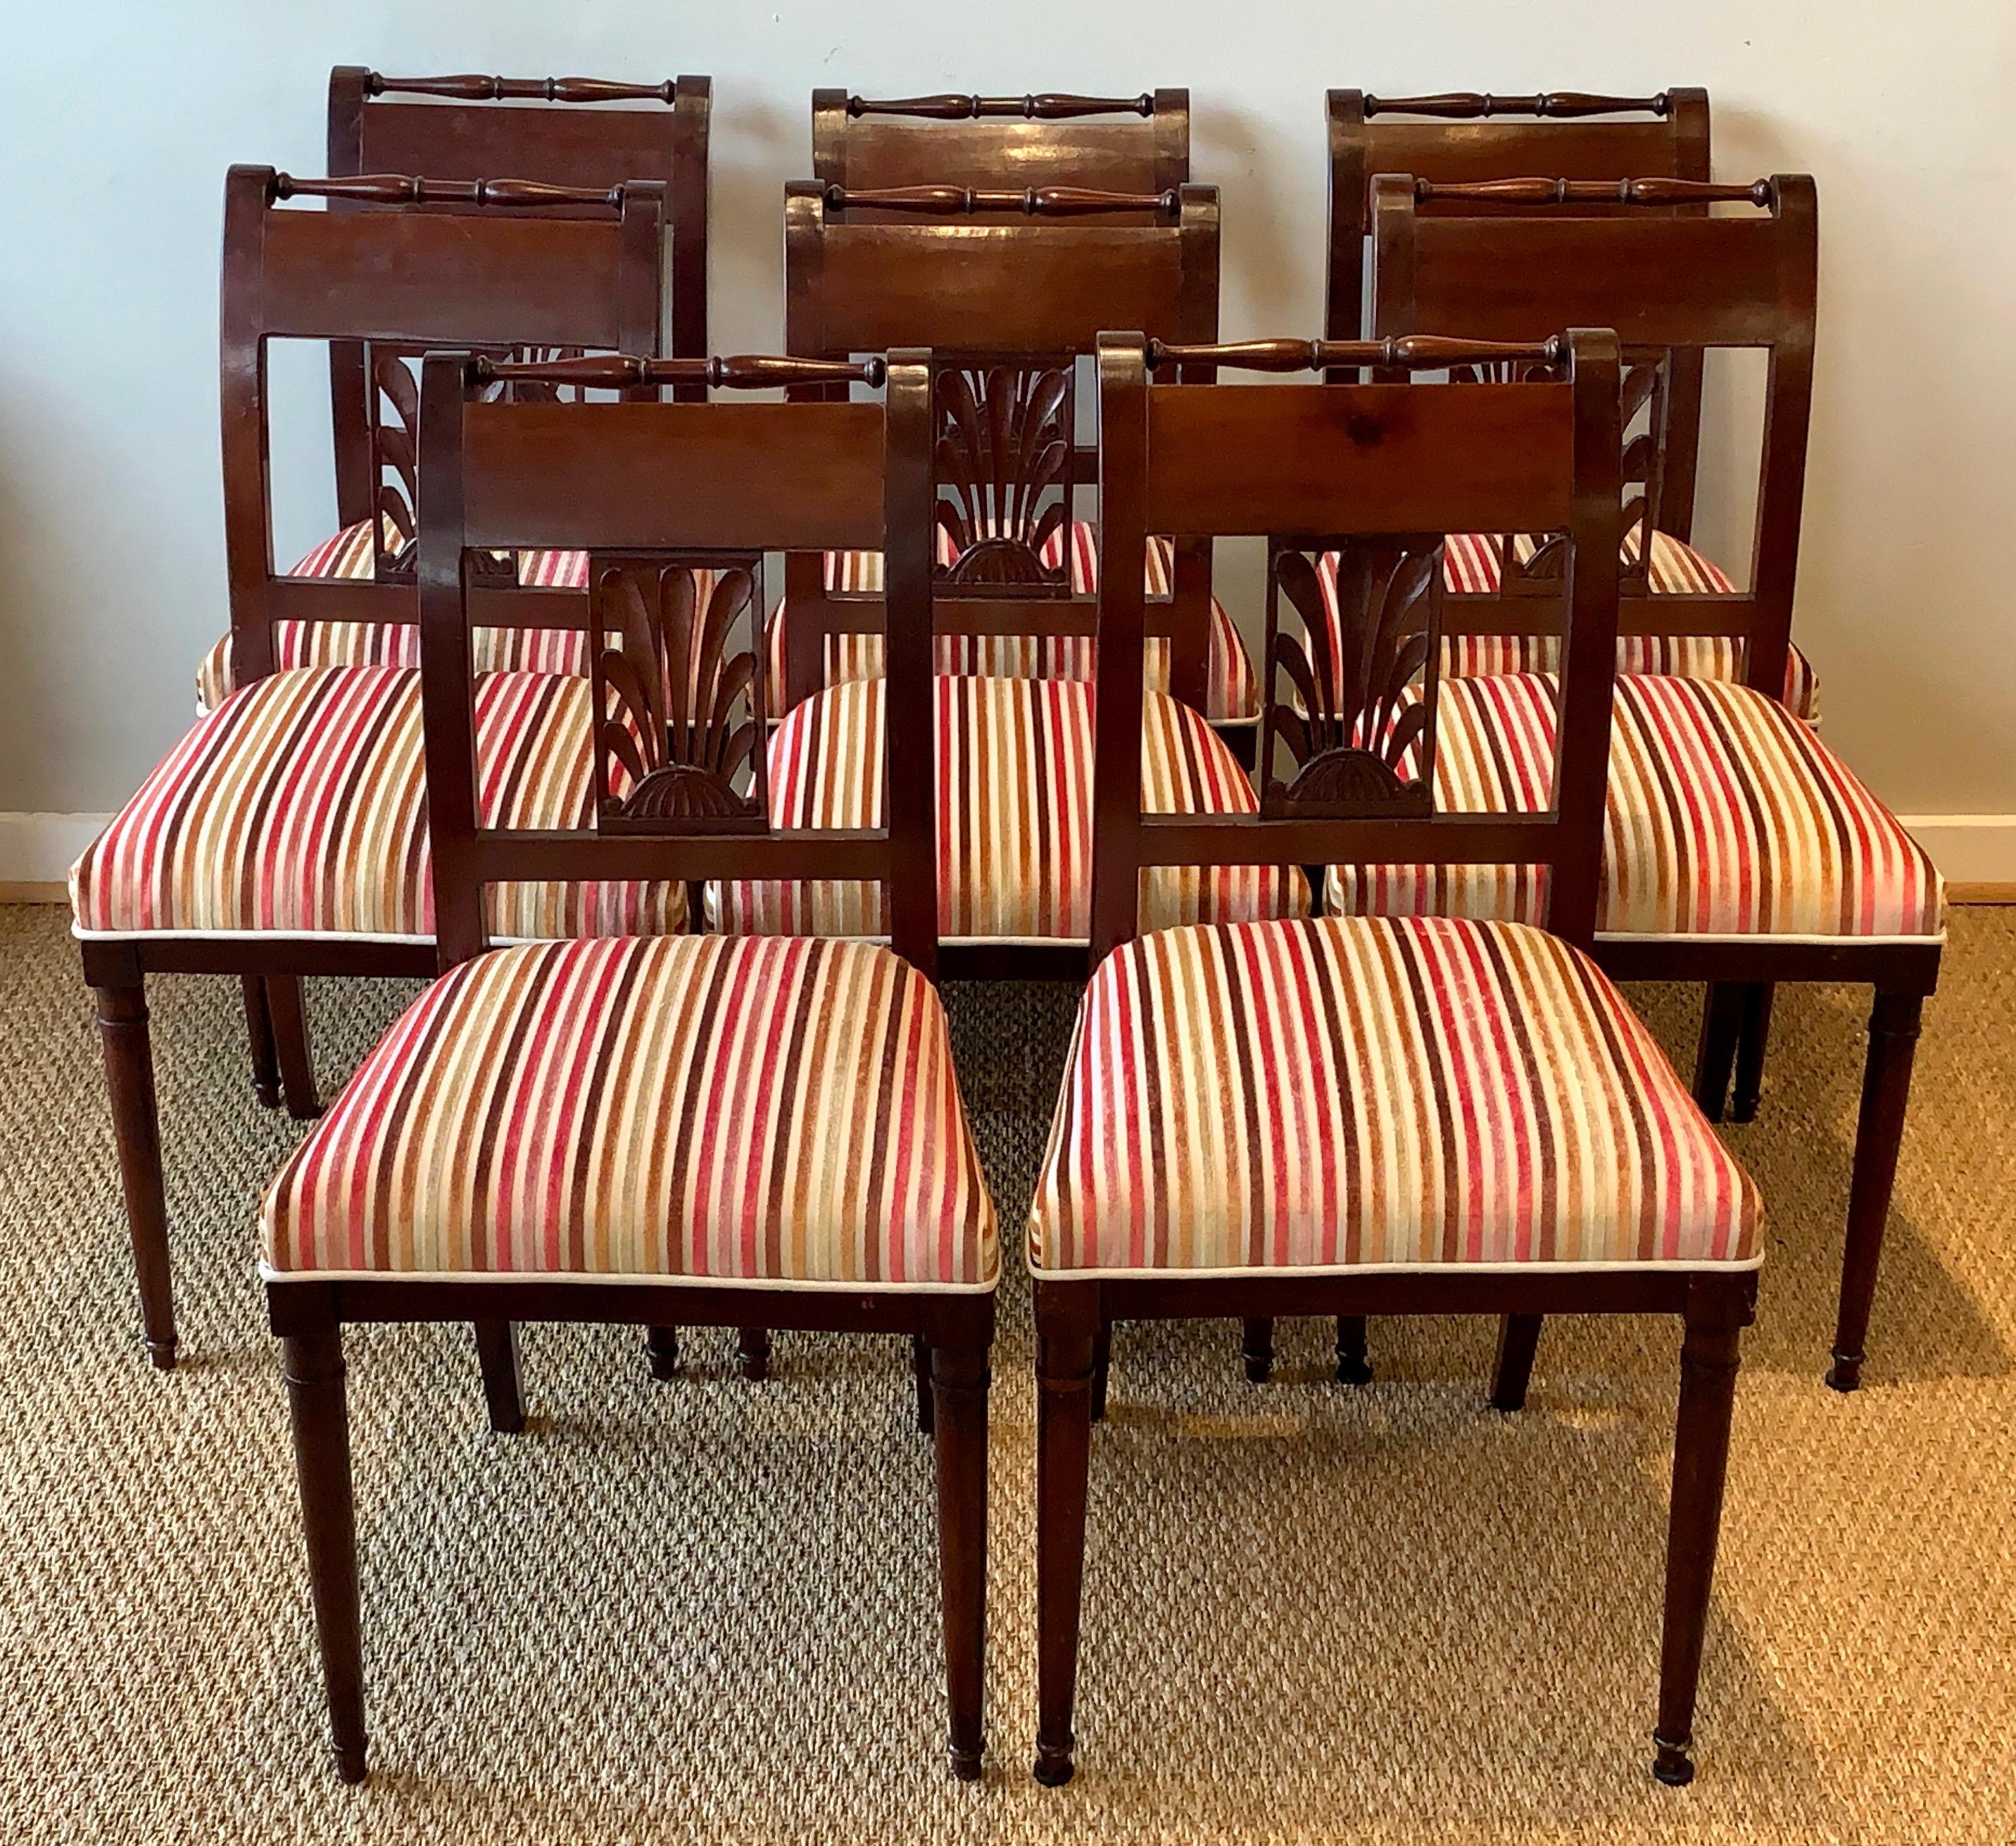 An elegant set of eight late 19th century Directoire style carved mahogany dining chairs comprising all sides. The delicately turned rail rests above a stylized carved acanthus leaf splat resting on round tapering legs. The chairs are newly